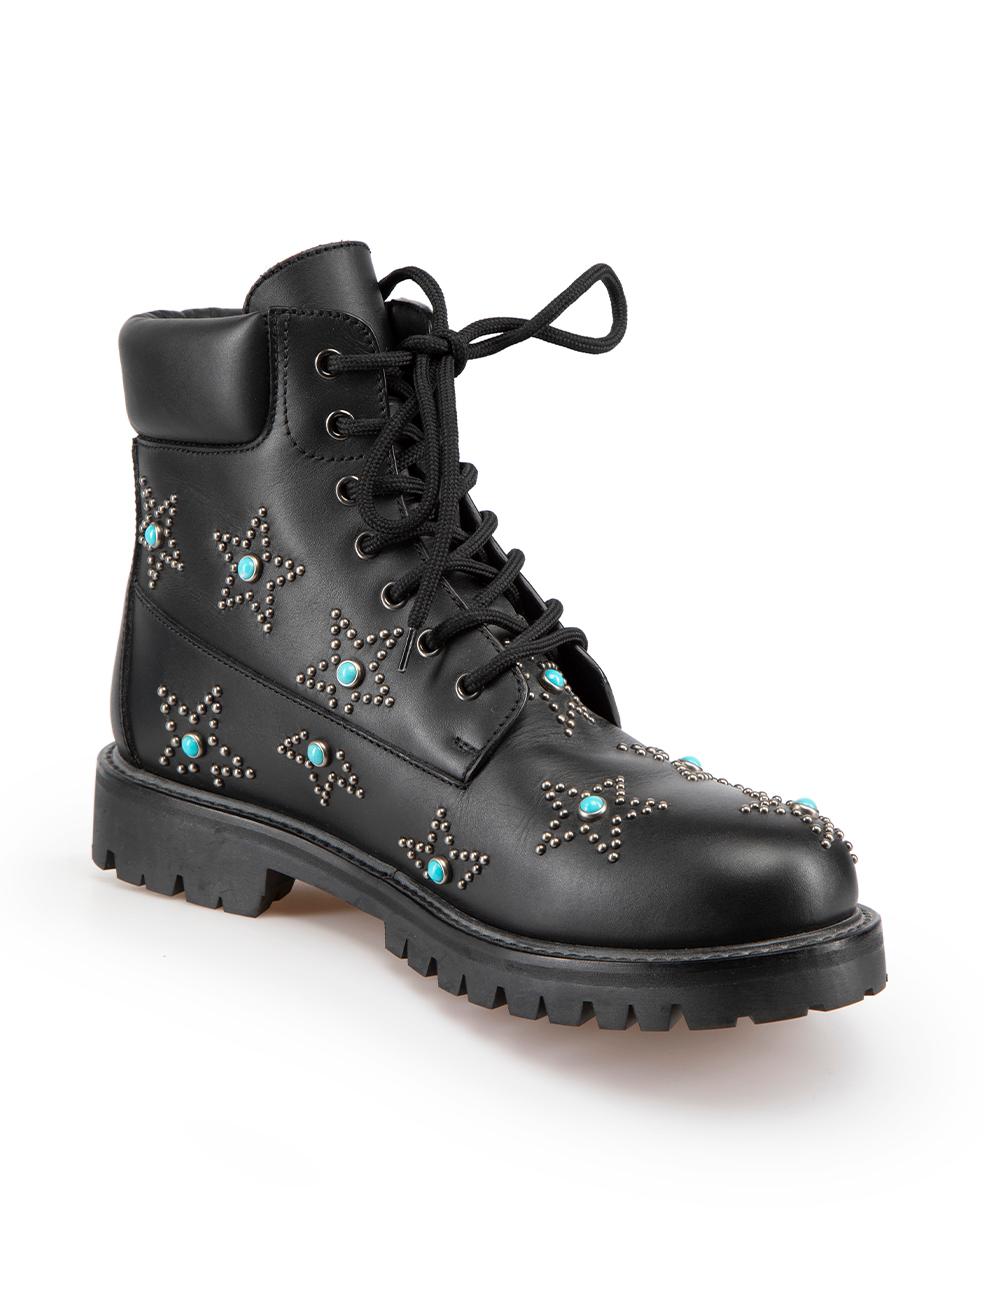 CONDITION is Very good. Minimal wear to boots is evident. Minimal wear to the embellishments at the heel of the right boot with scratches to two of the turquoise stones on this used Valentino designer resale item.

Details
Black
Leather
Combat